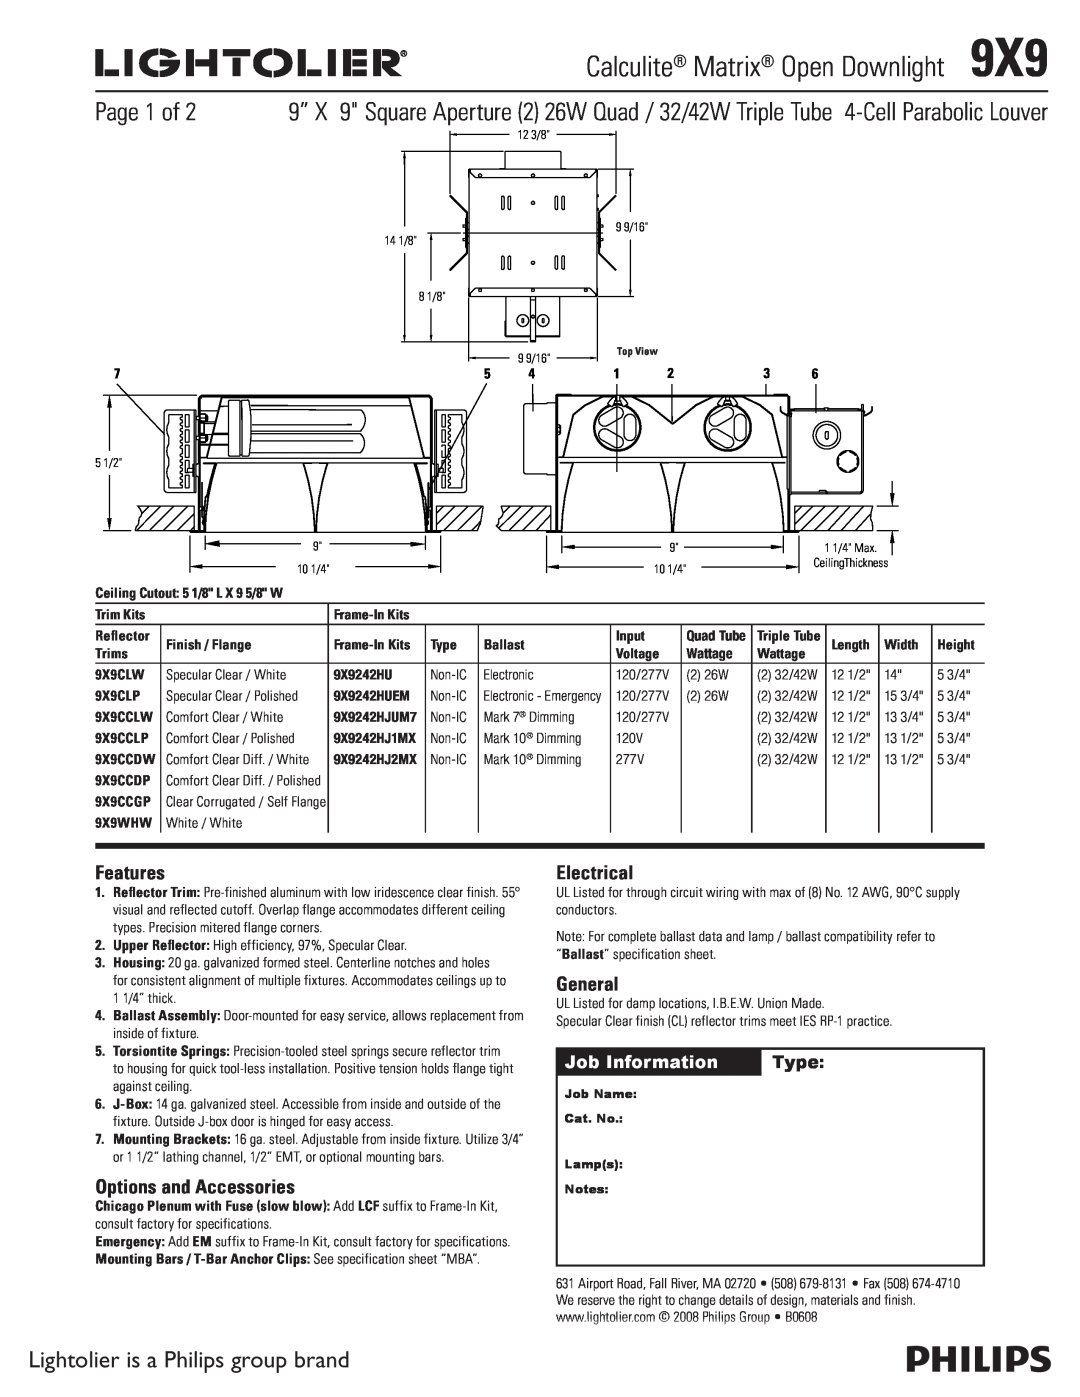 Lightolier specifications Calculite Matrix Open Downlight9X9, Page 1 of, Lightolier is a Philips group brand, Features 